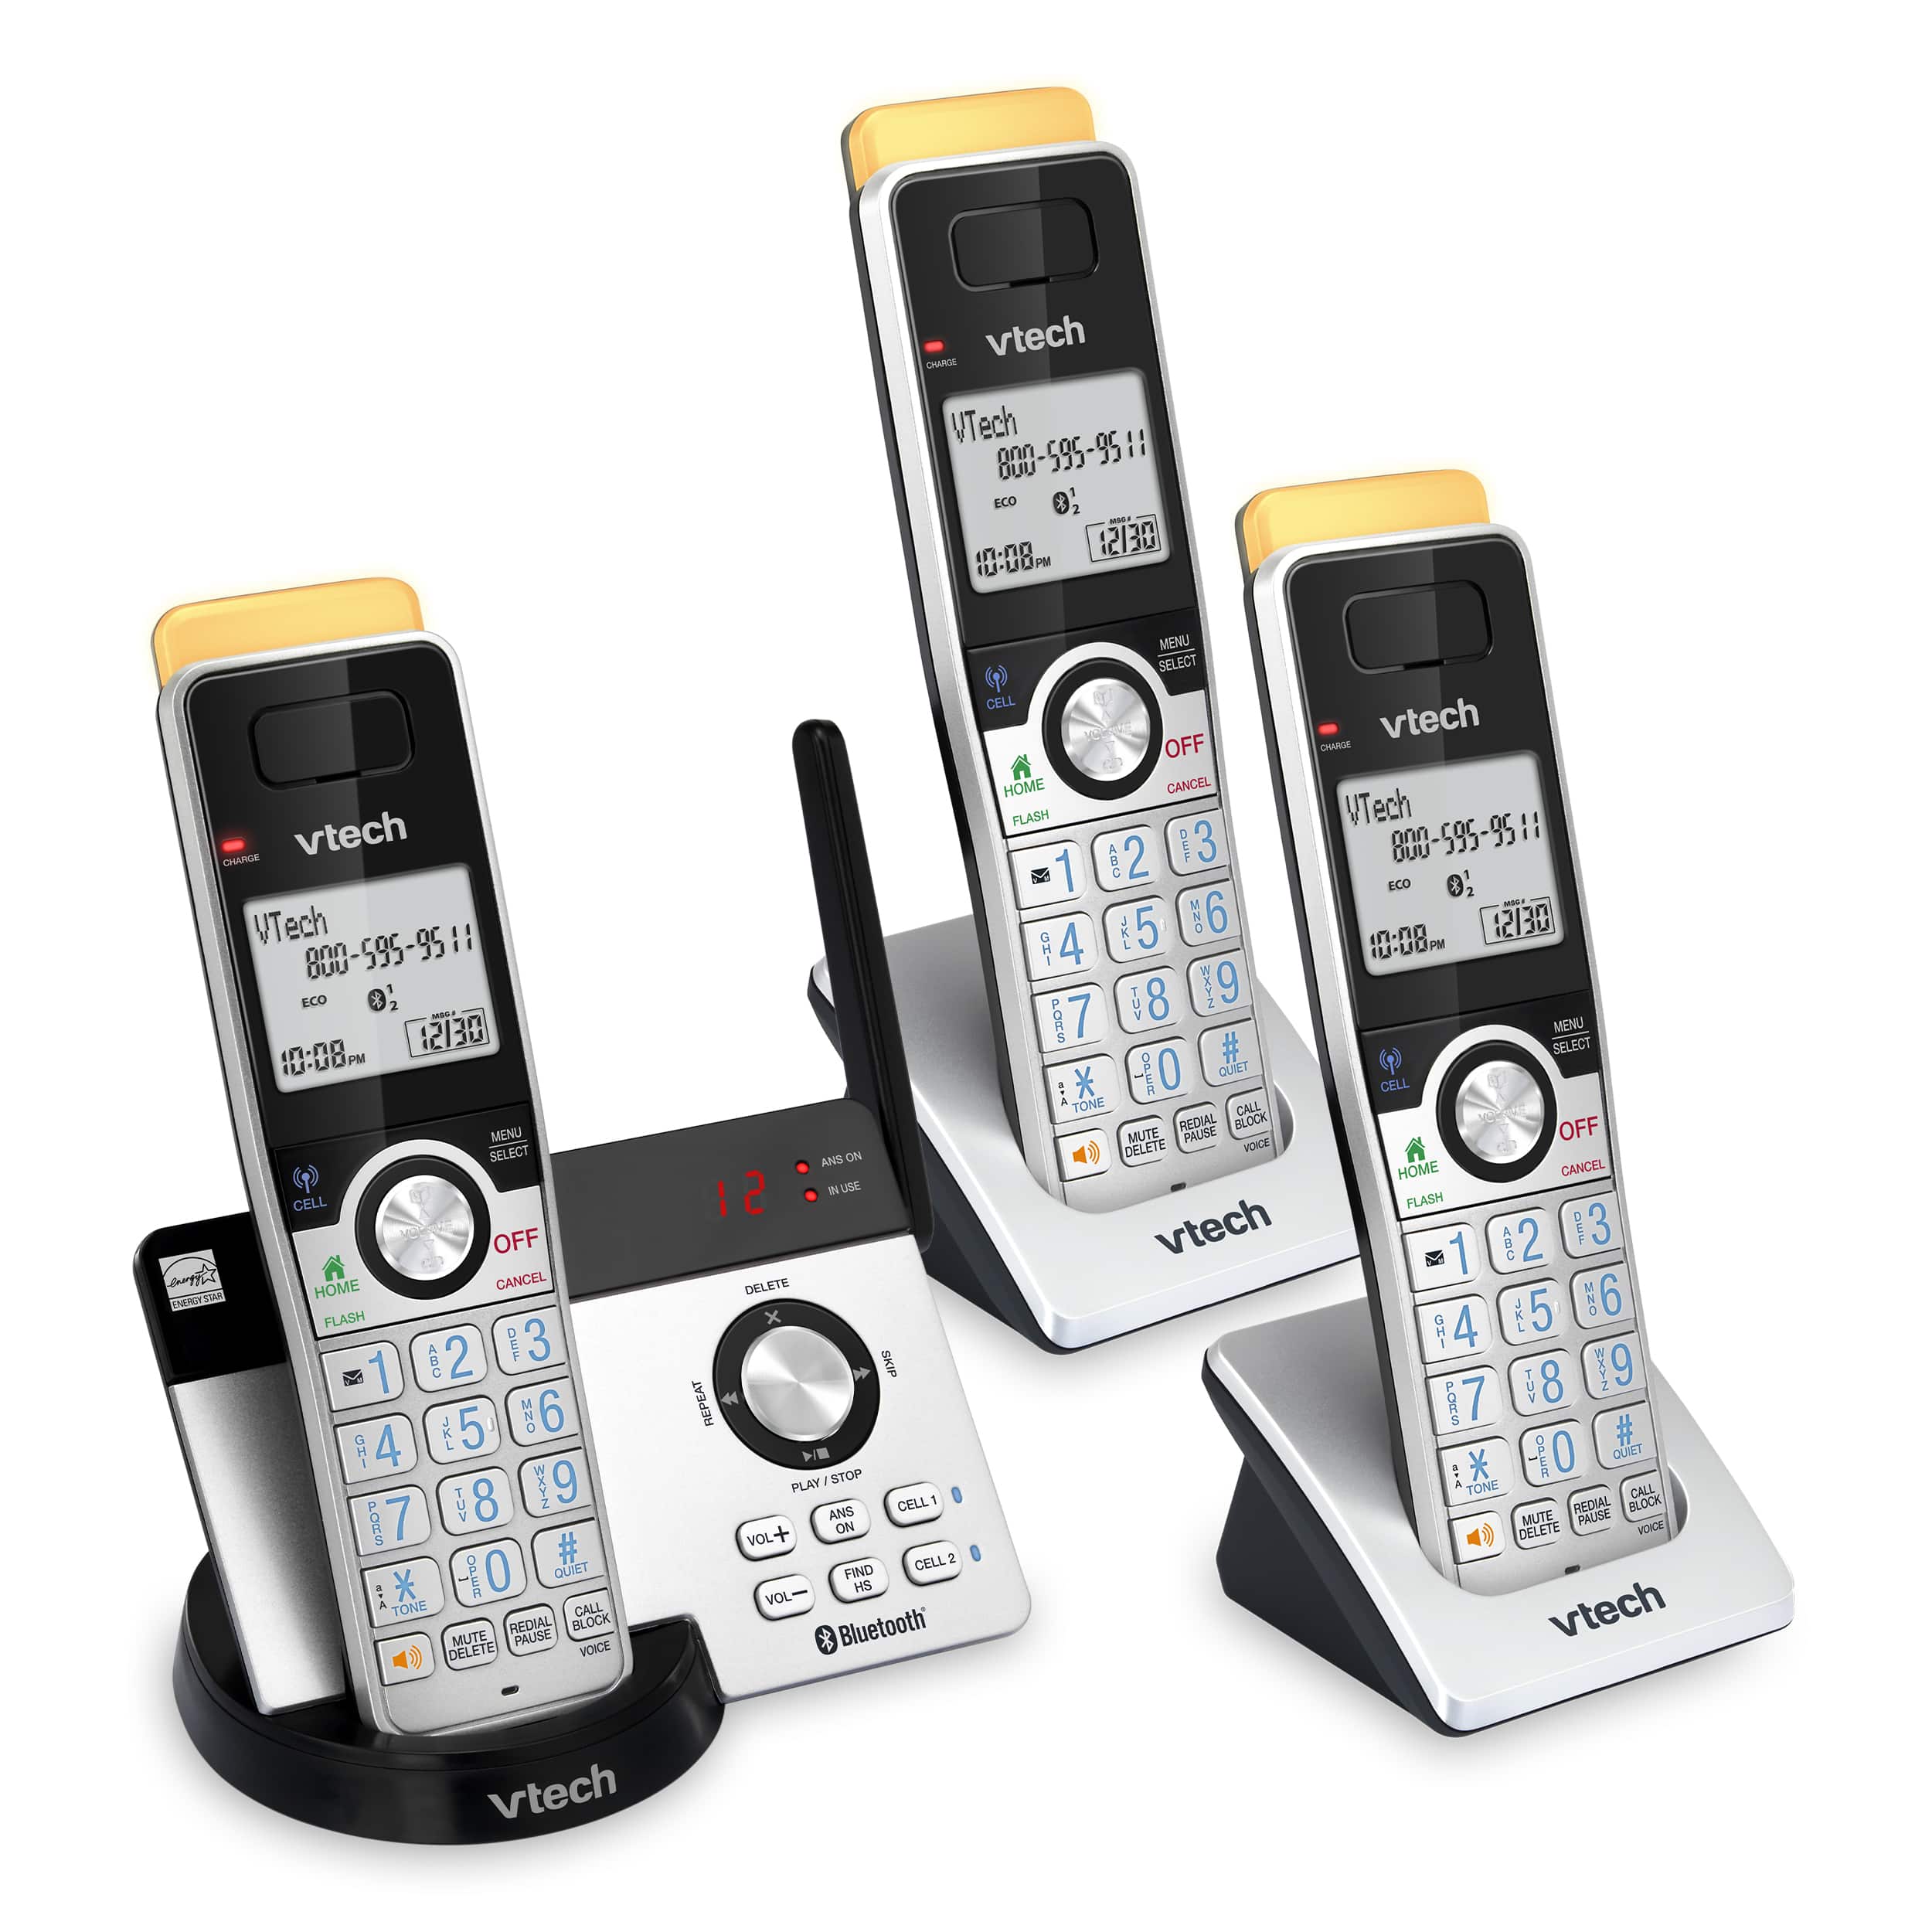 3-Handset Expandable Cordless Phone with Super Long Range, Bluetooth Connect to Cell, Smart Call Blocker and Answering System